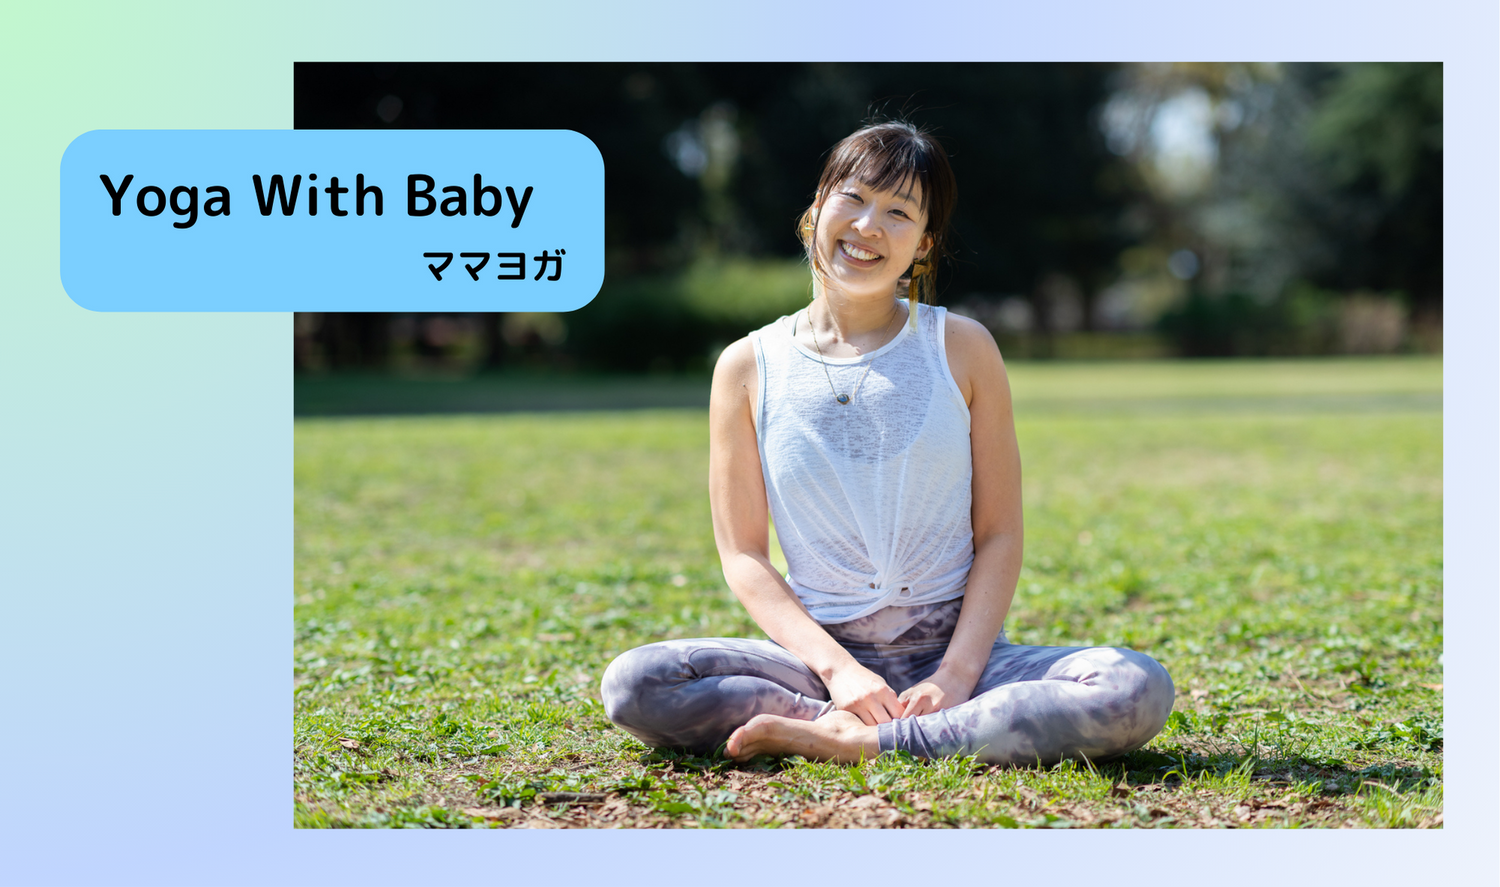 Yoga with Baby<br />
①